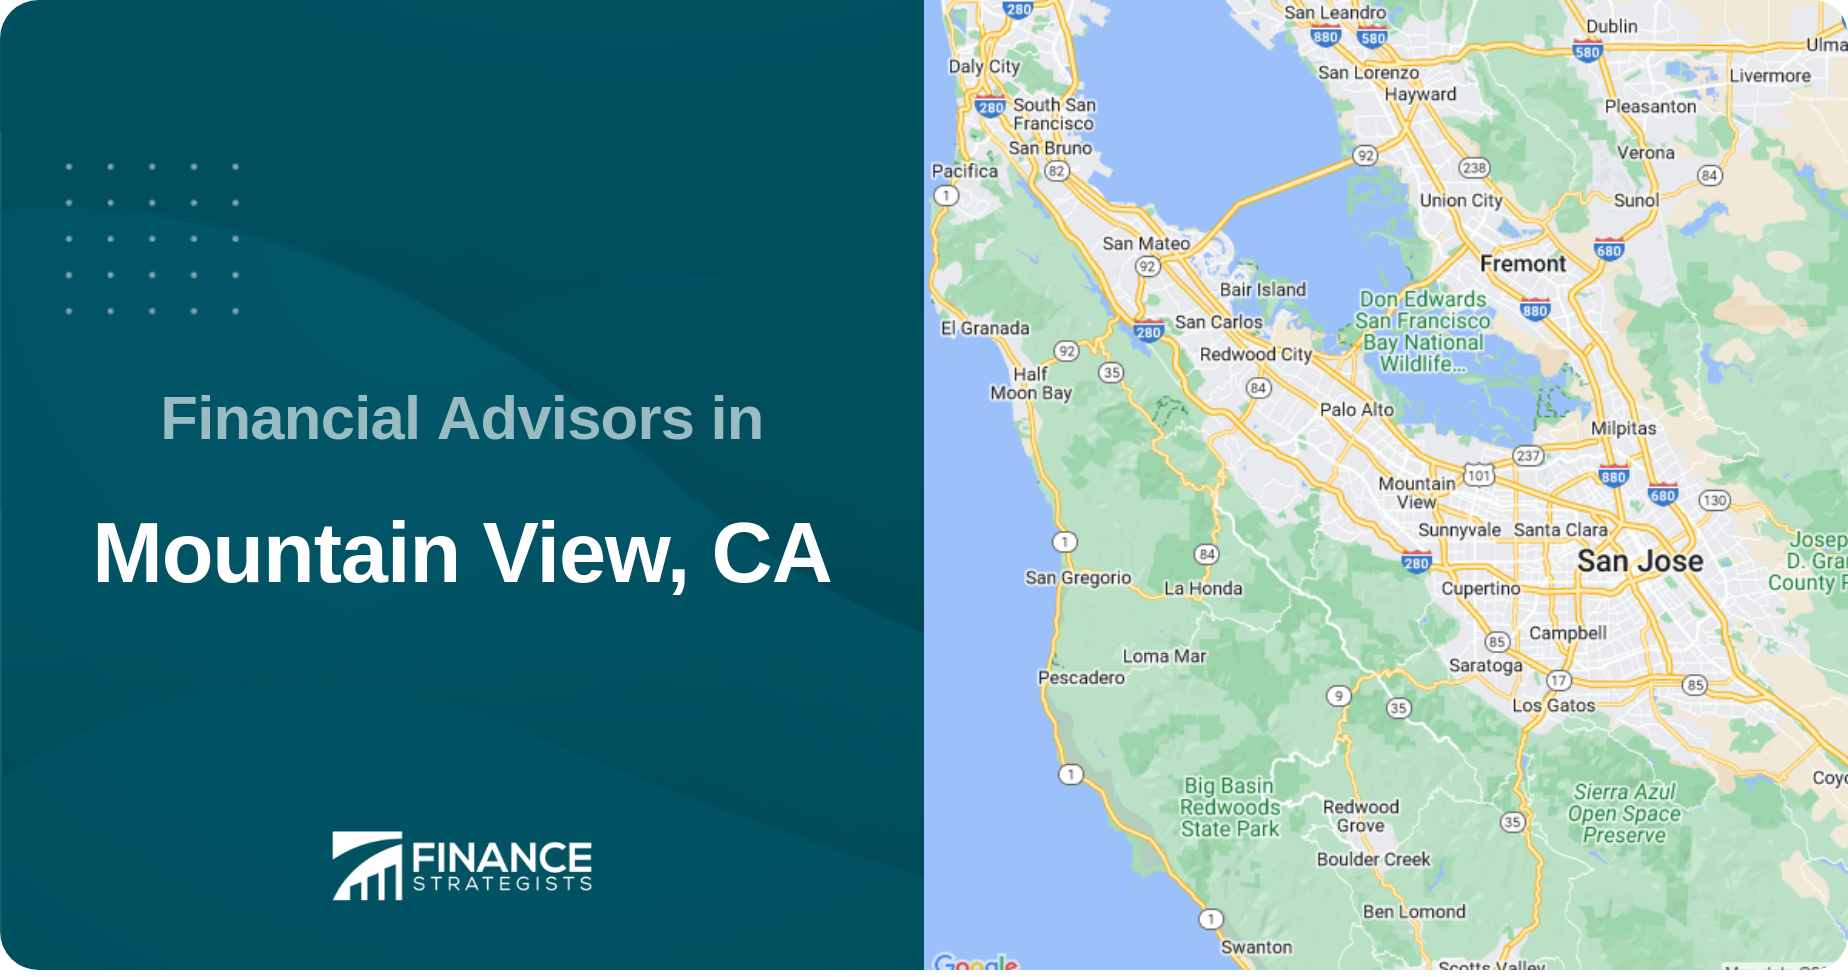 Financial Advisors in Mountain View, CA